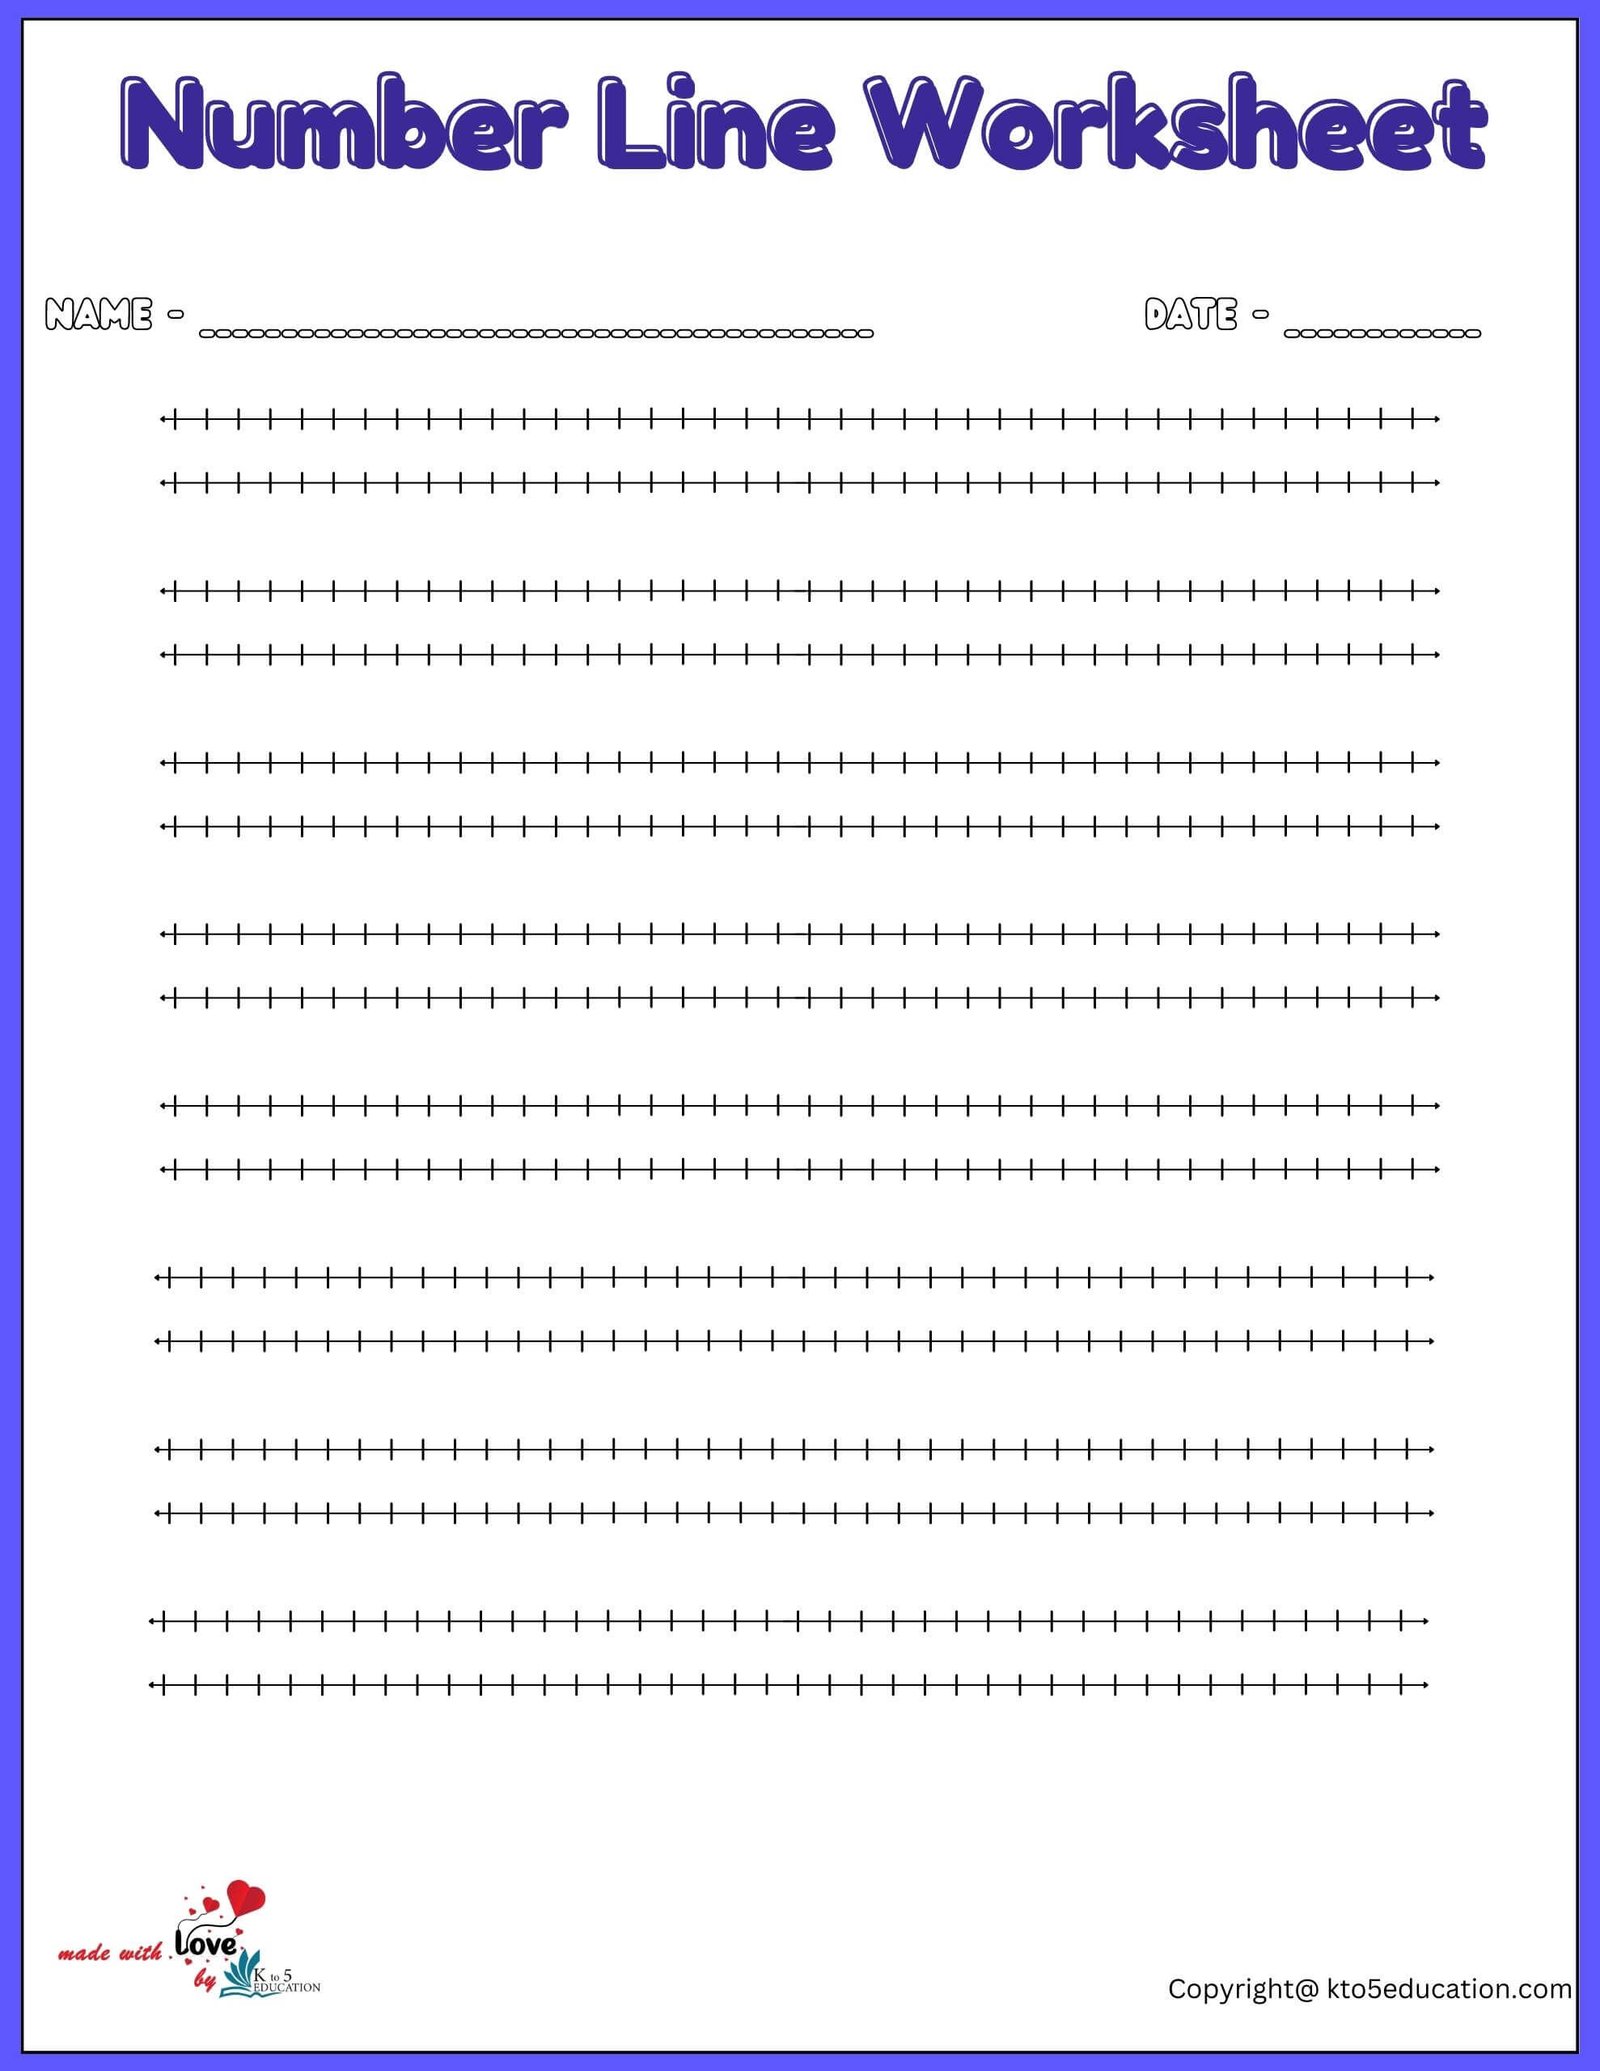 Free Double Number Line Worksheet 1-40